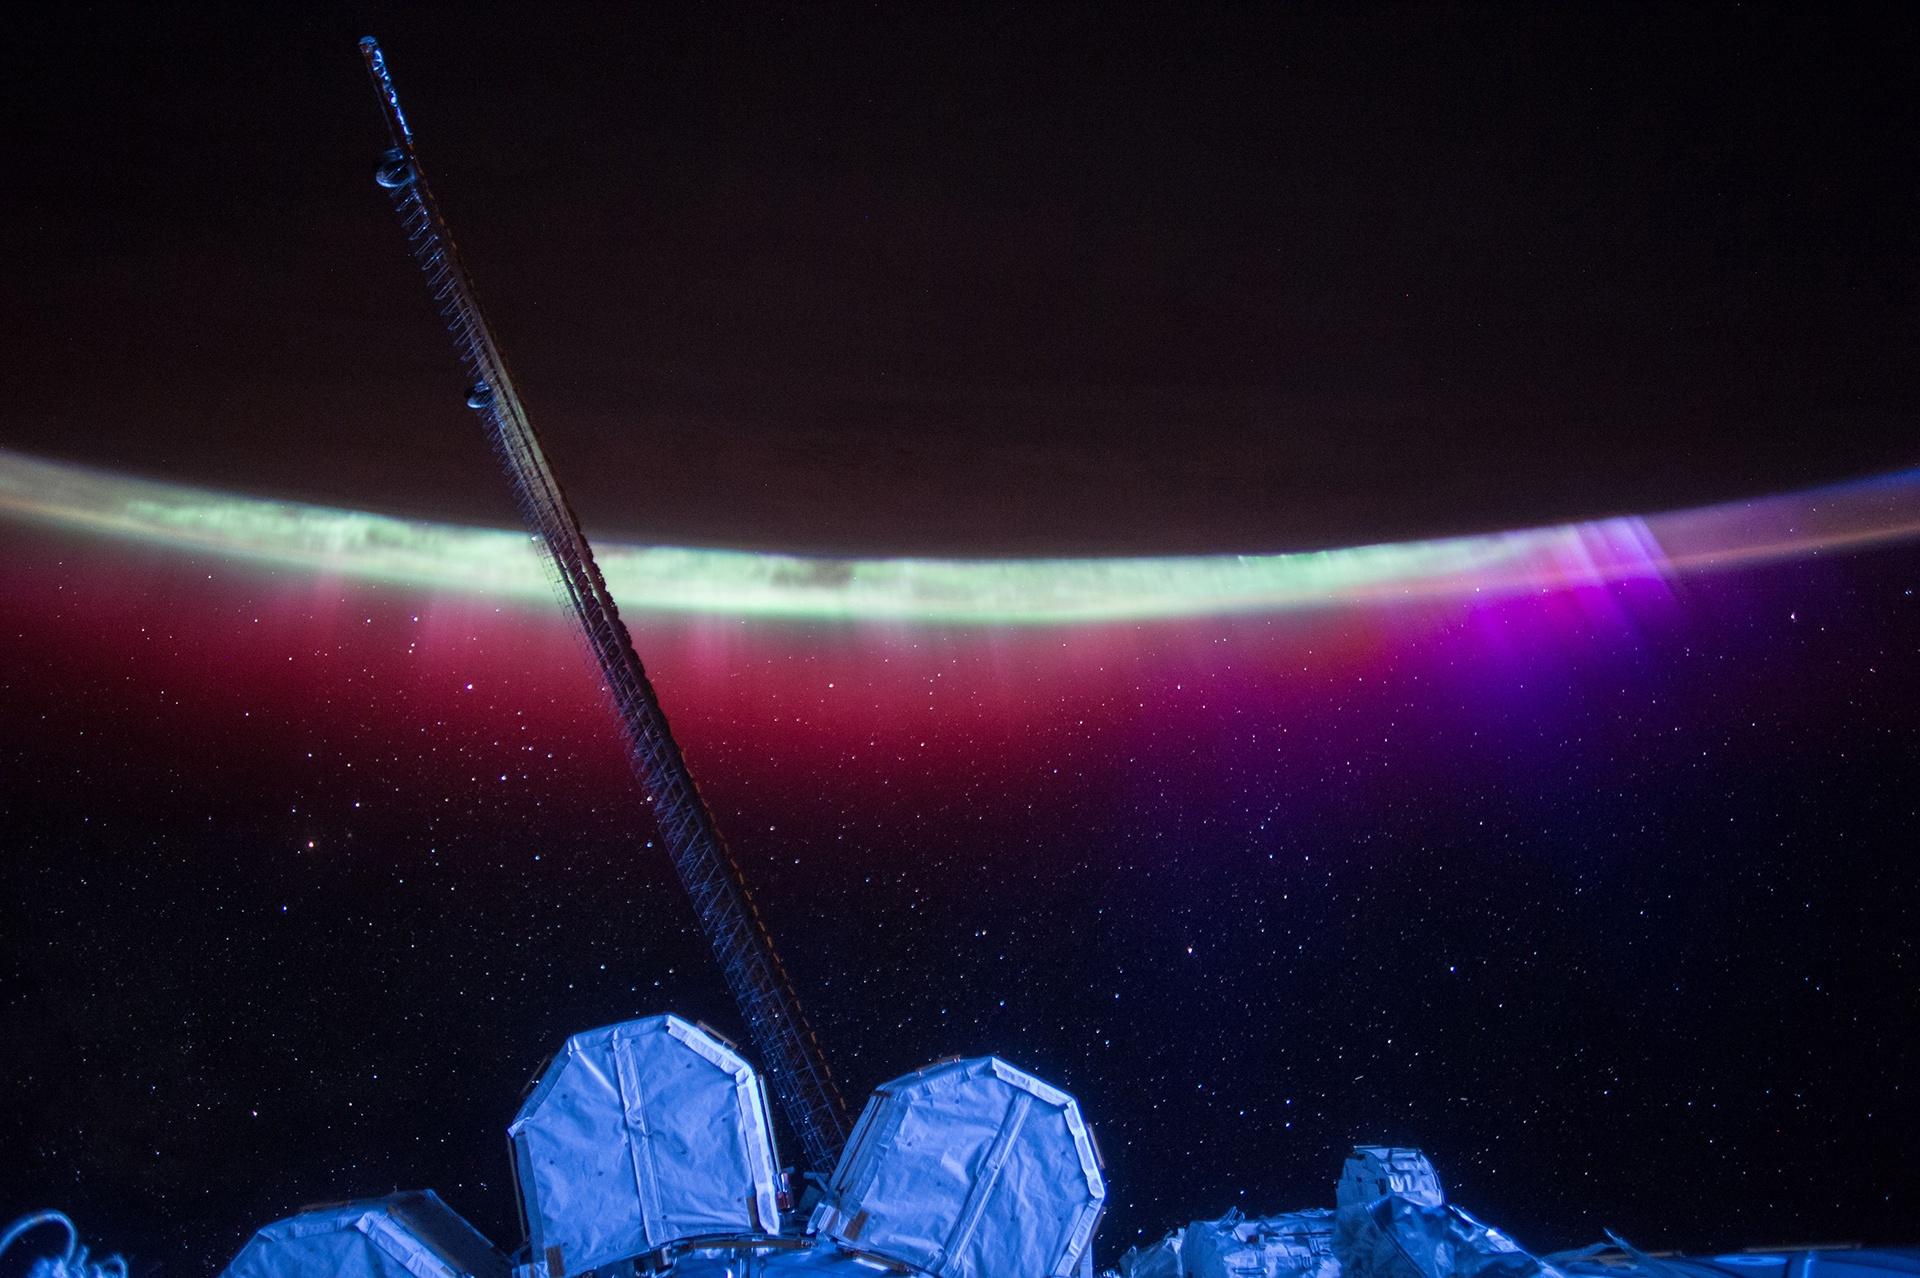 Scott Kelly shared this photograph of the Aurora's colorful veil over Earth.